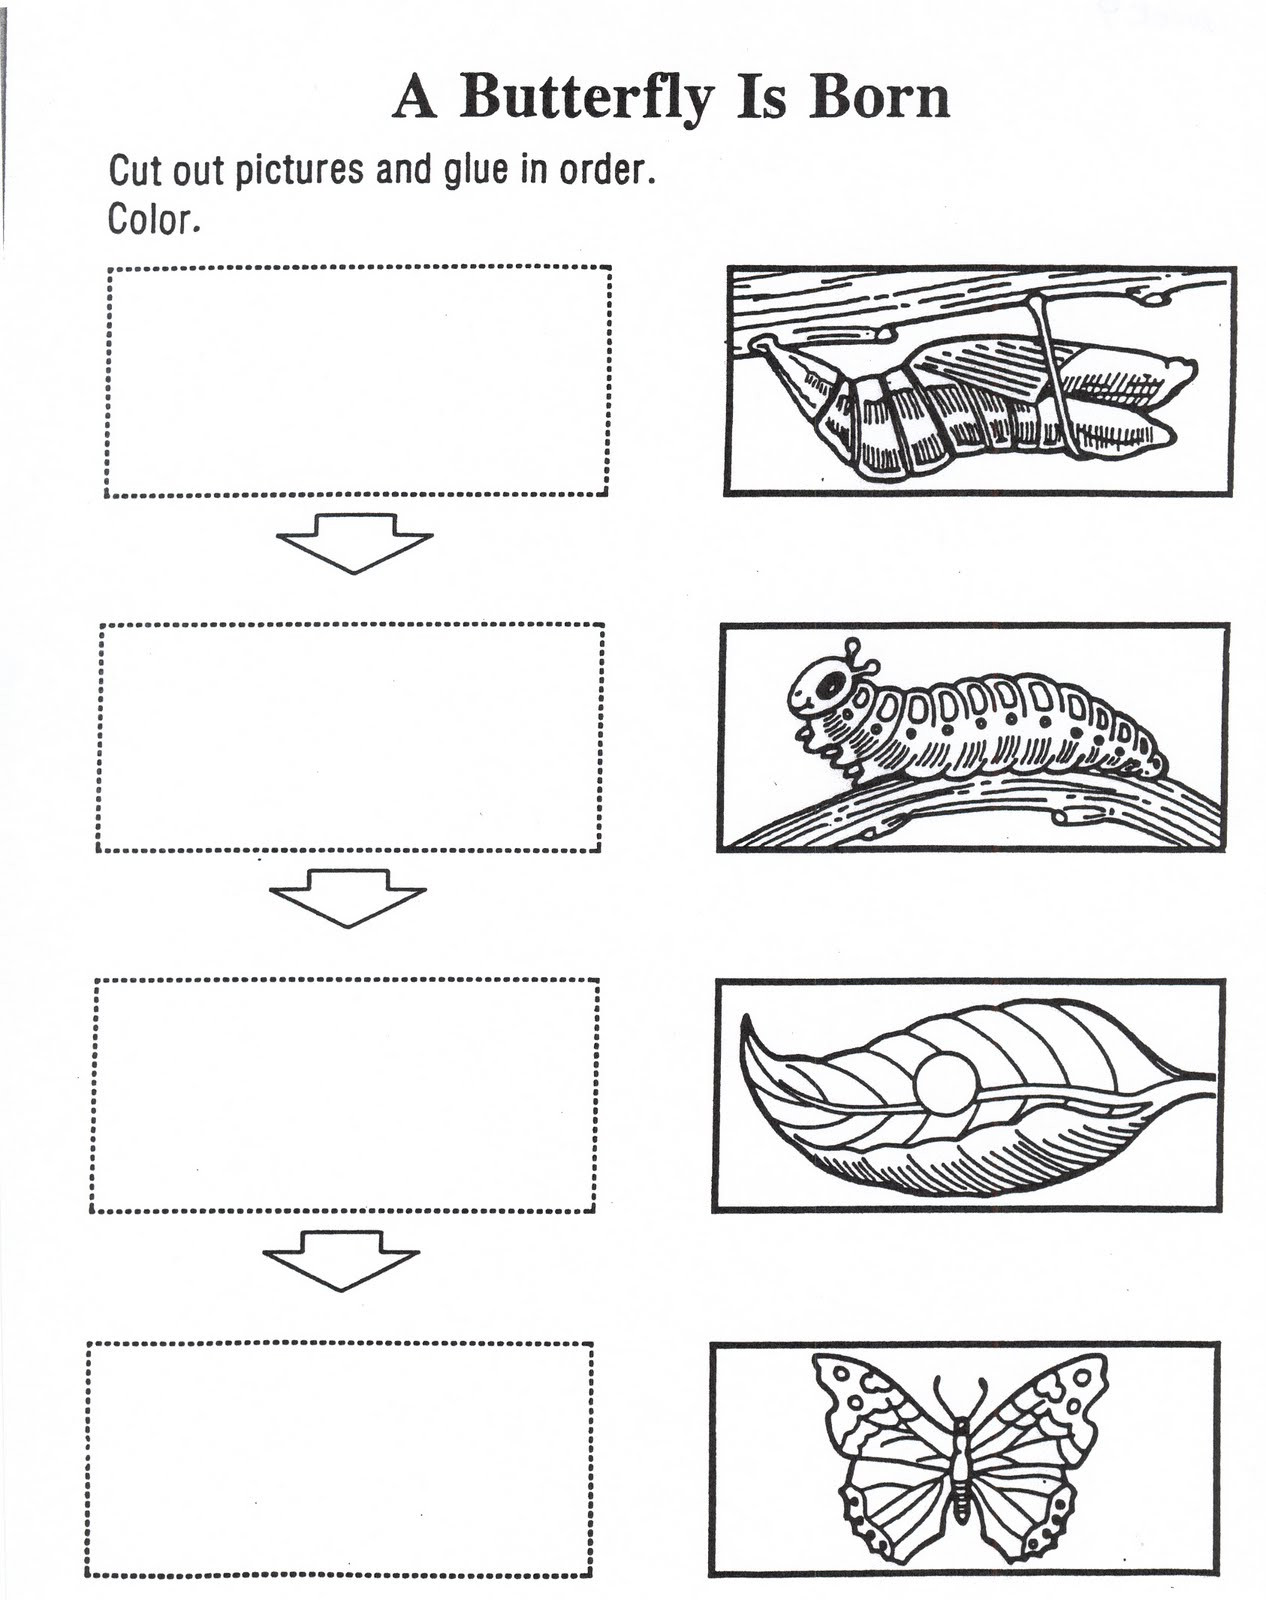 Butterfly Life Cycle Worksheet 2 Life Cycle 2nd 3rd Non butterfly Worksheets Grade